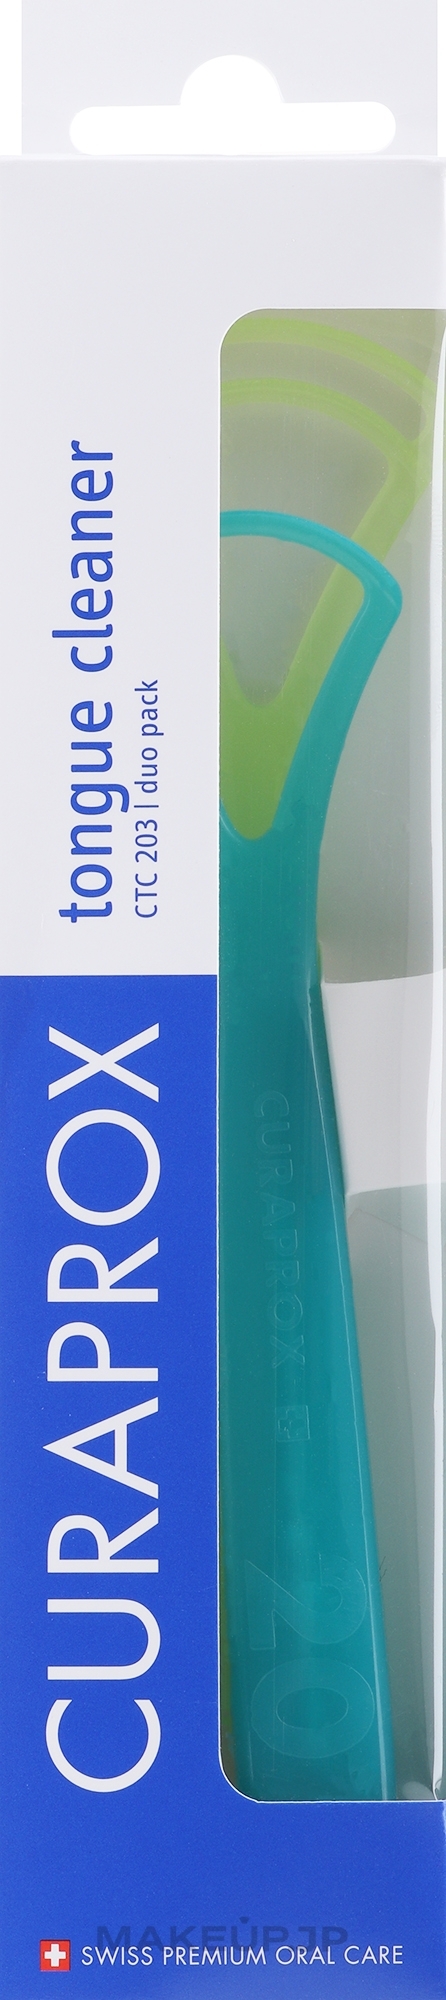 Tongue Cleaner Set CTC 203, turquoise + light green - Curaprox Tongue Cleaner — photo 2 szt.